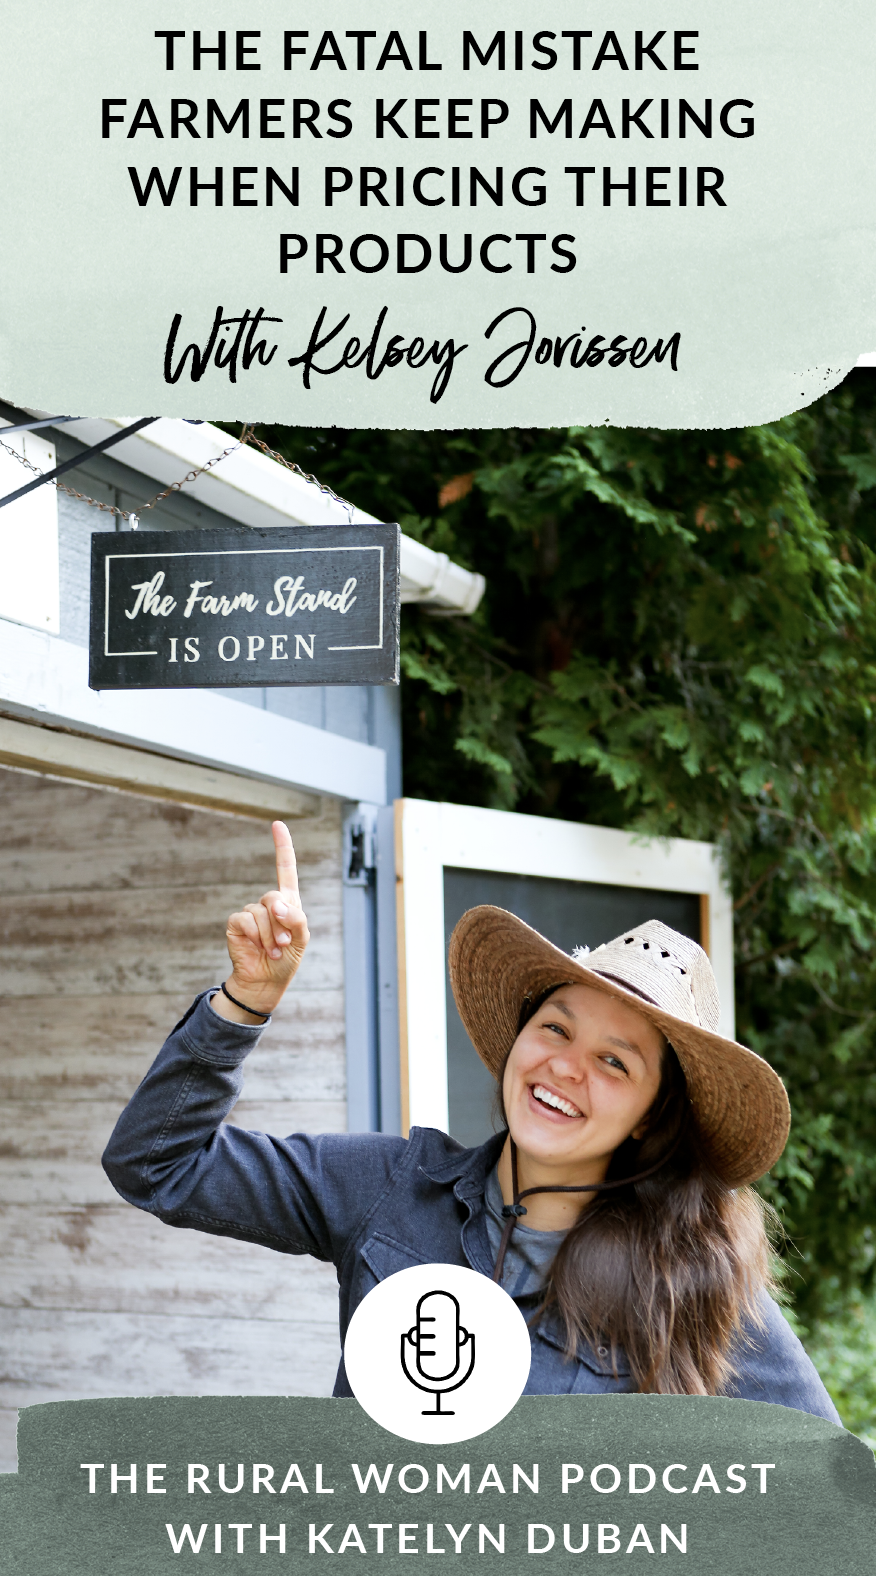 The fatal mistake farmers keep making when pricing their products - Interview with Kelsey Jorissen on The Rural Woman Podcast with Katelyn Duban